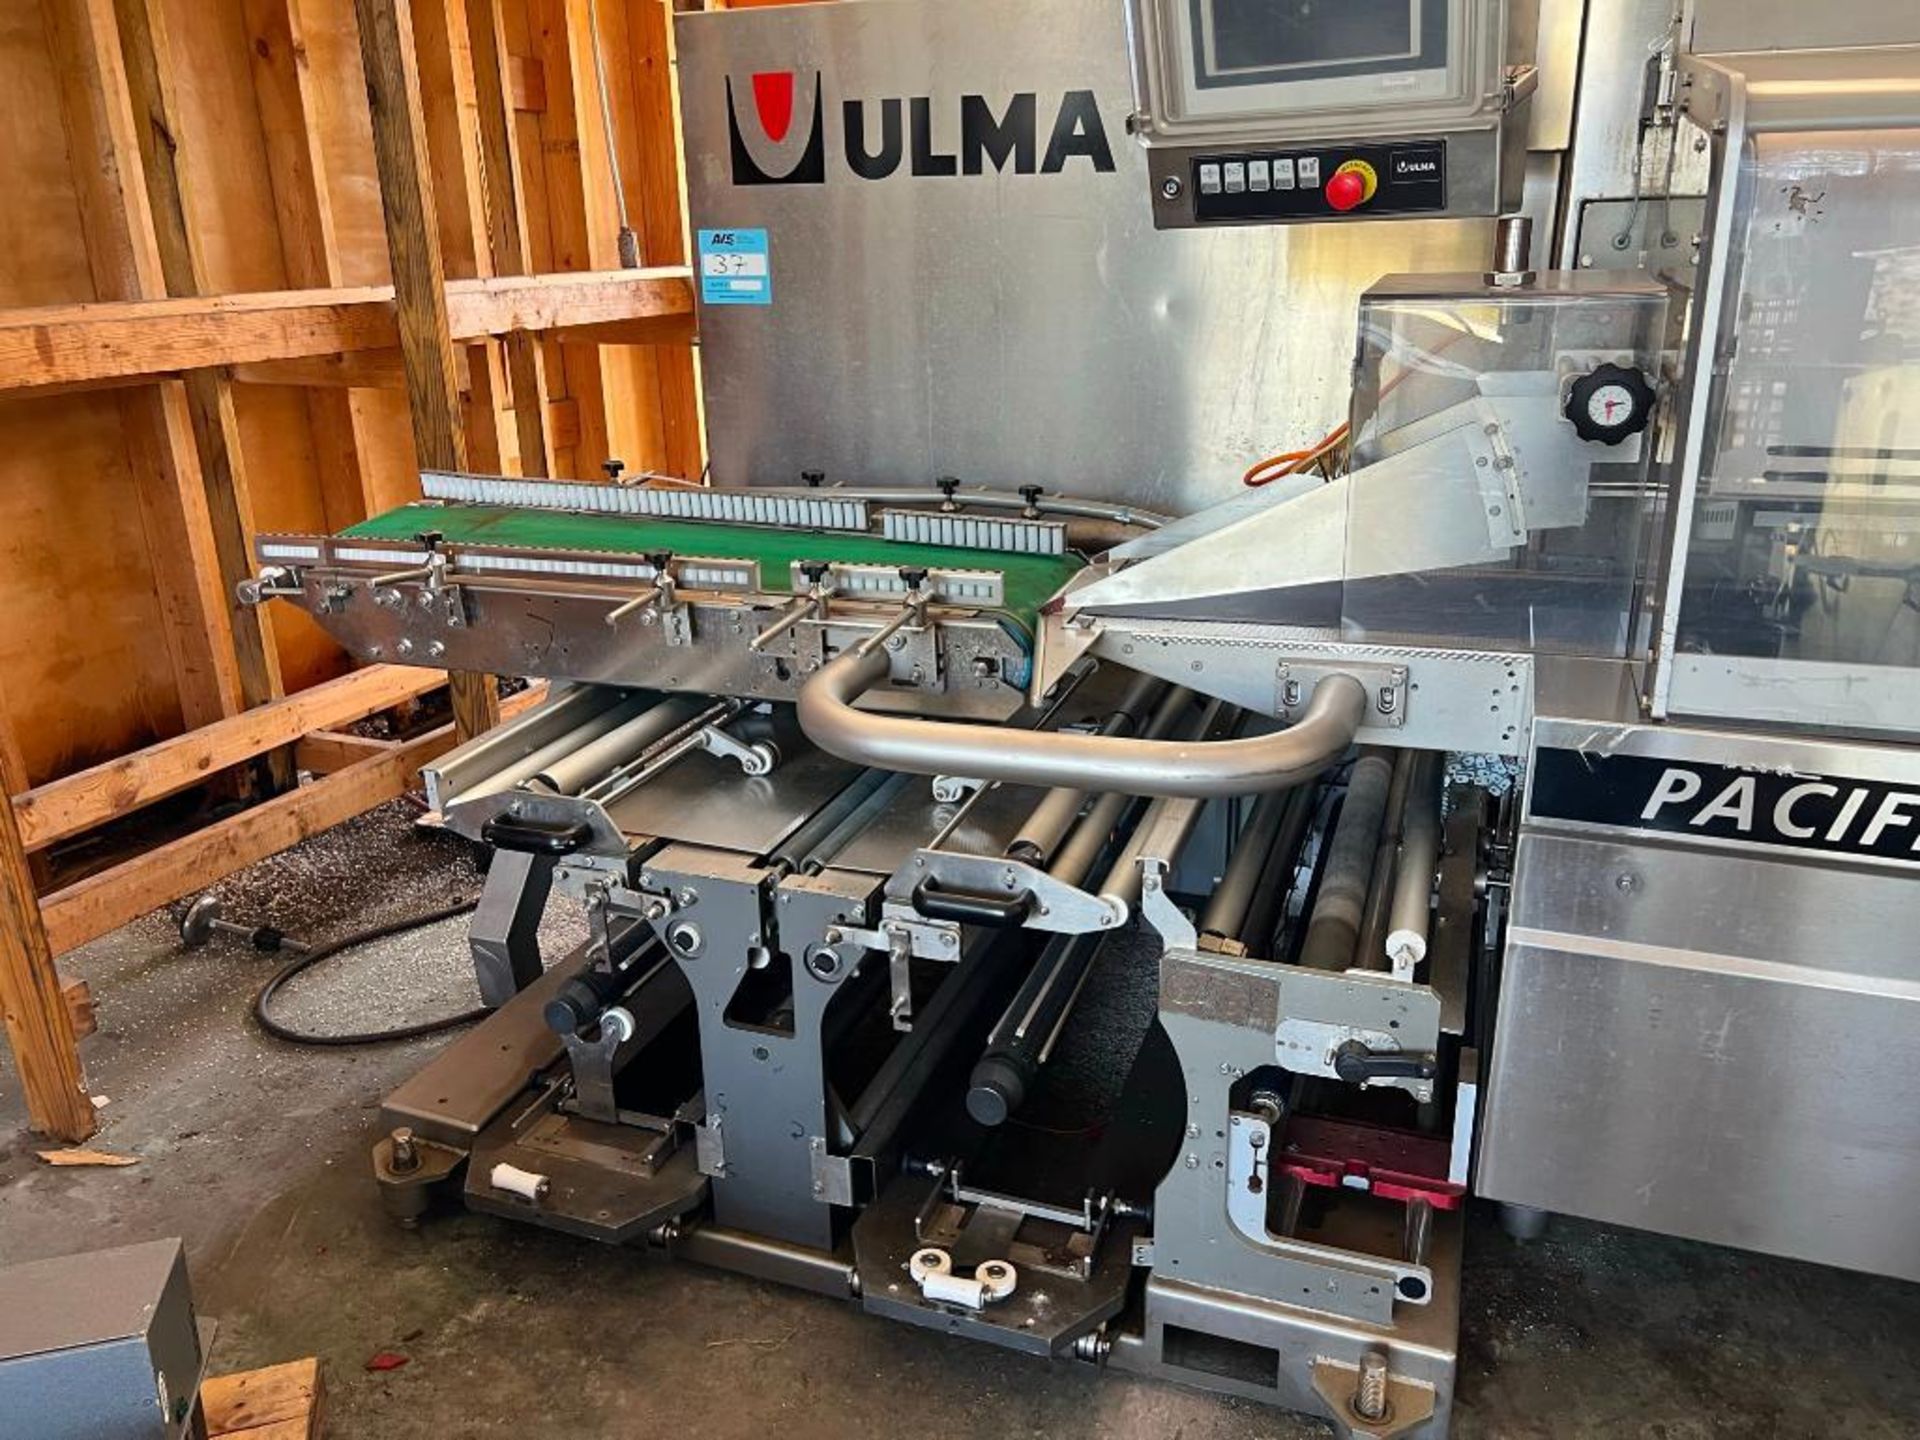 Ulma Pacific Flow wrapper, Model: Pacific LS BI MBAG, sn: 1310622, 230V/3ph/60hz, year: 2016. 139 L - Image 6 of 10